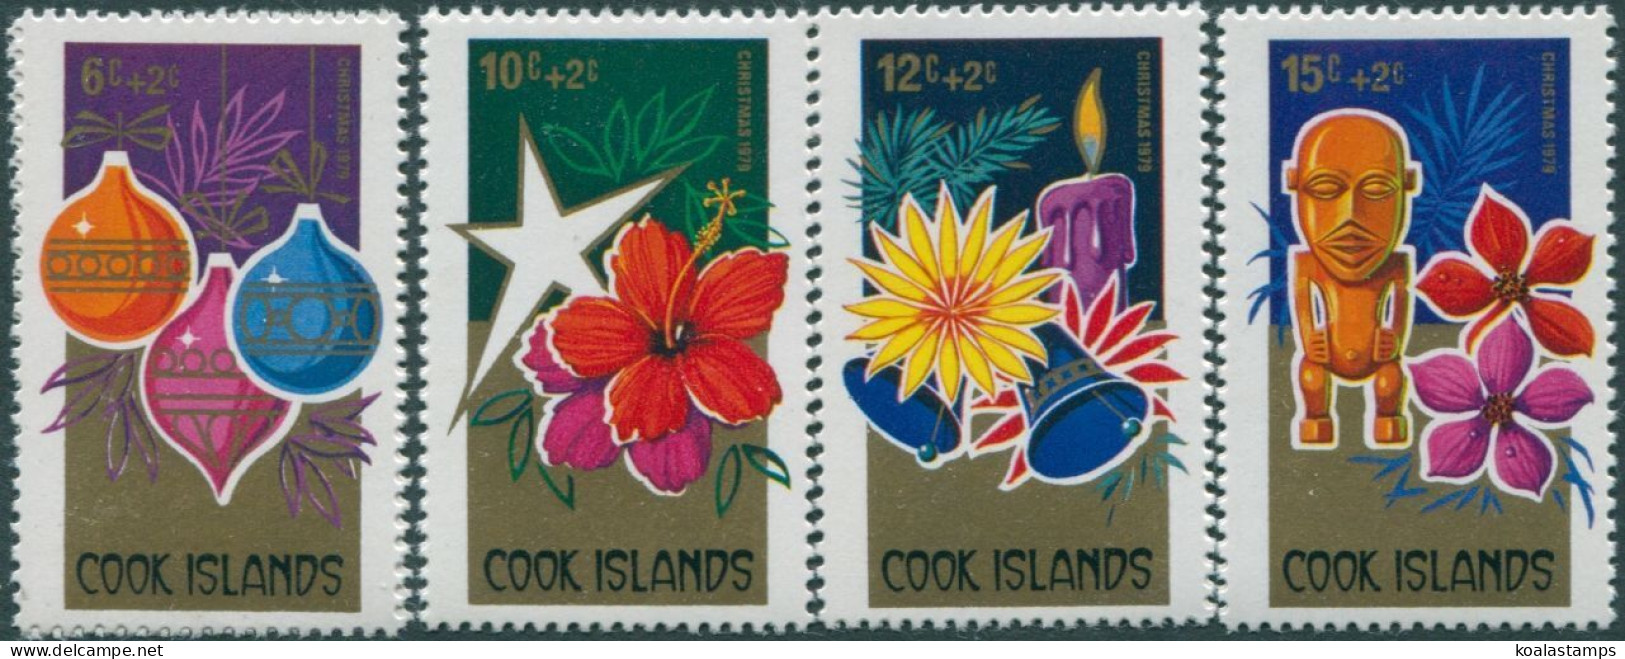 Cook Islands 1979 SG667-670 Christmas Surcharges Set MNH - Cookinseln